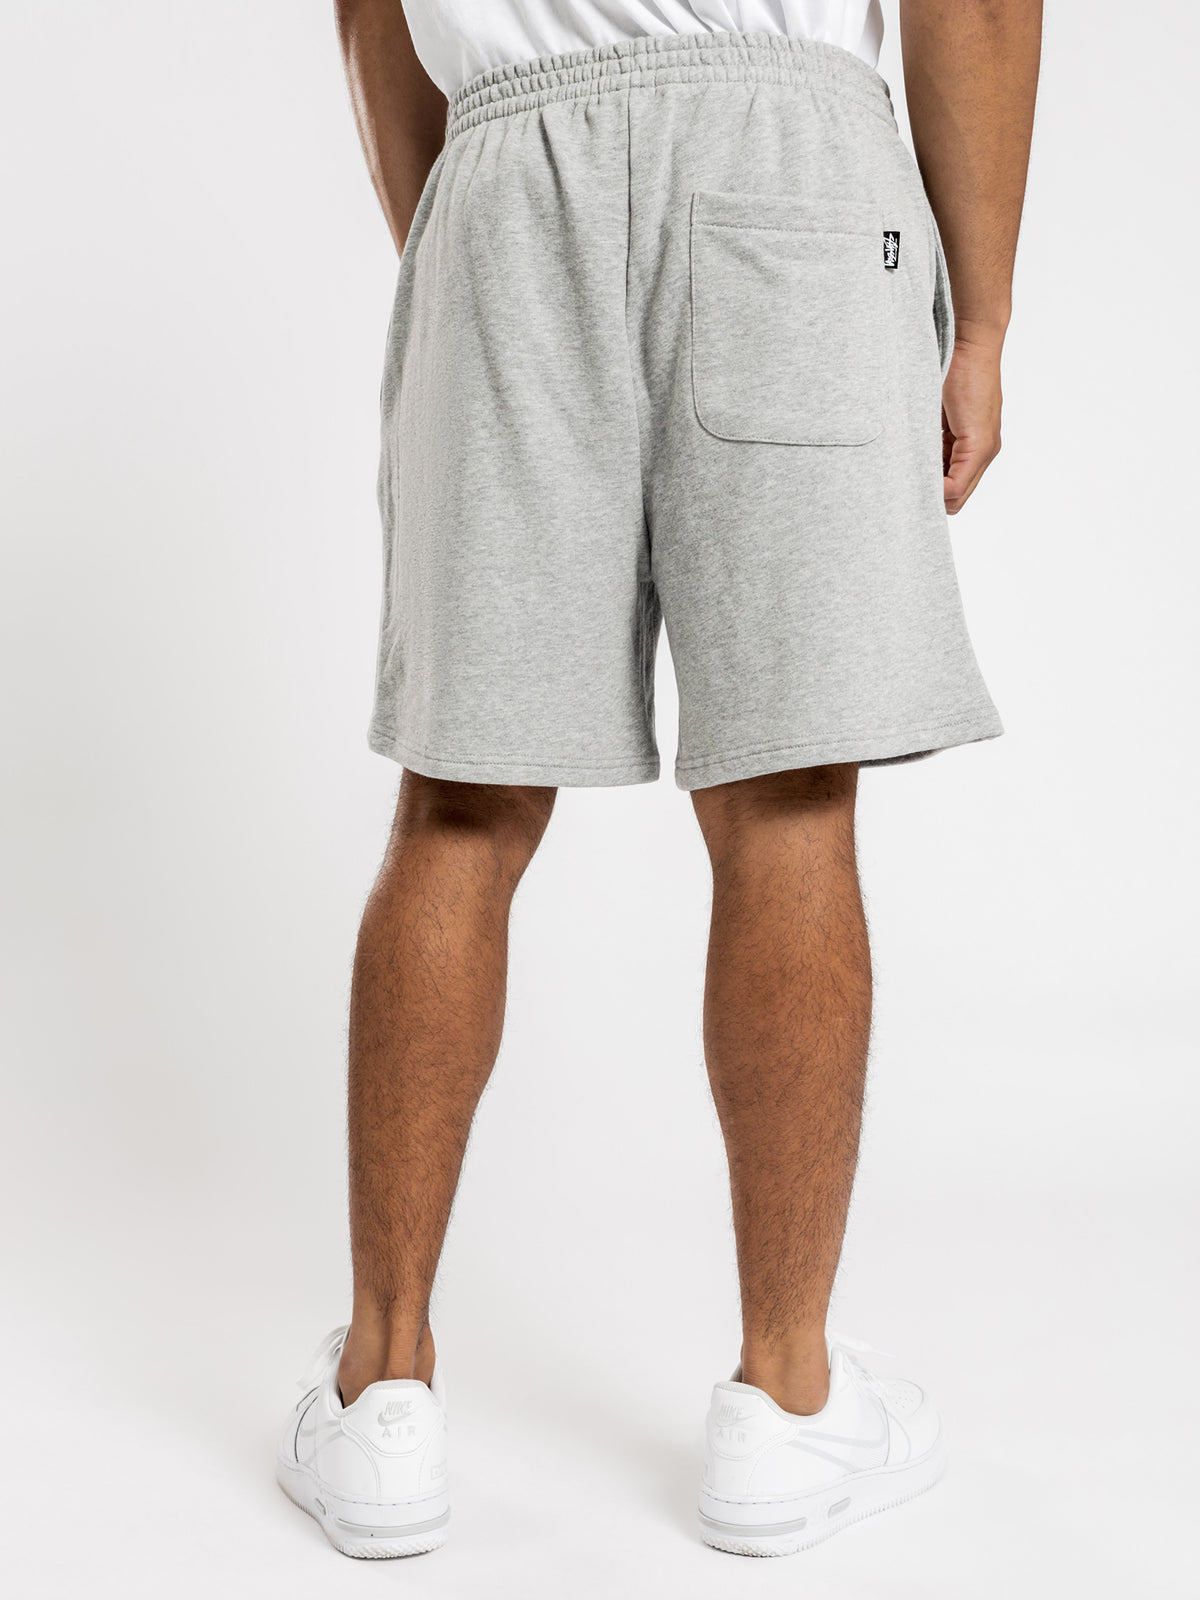 Designs Terry Shorts in Grey Marle